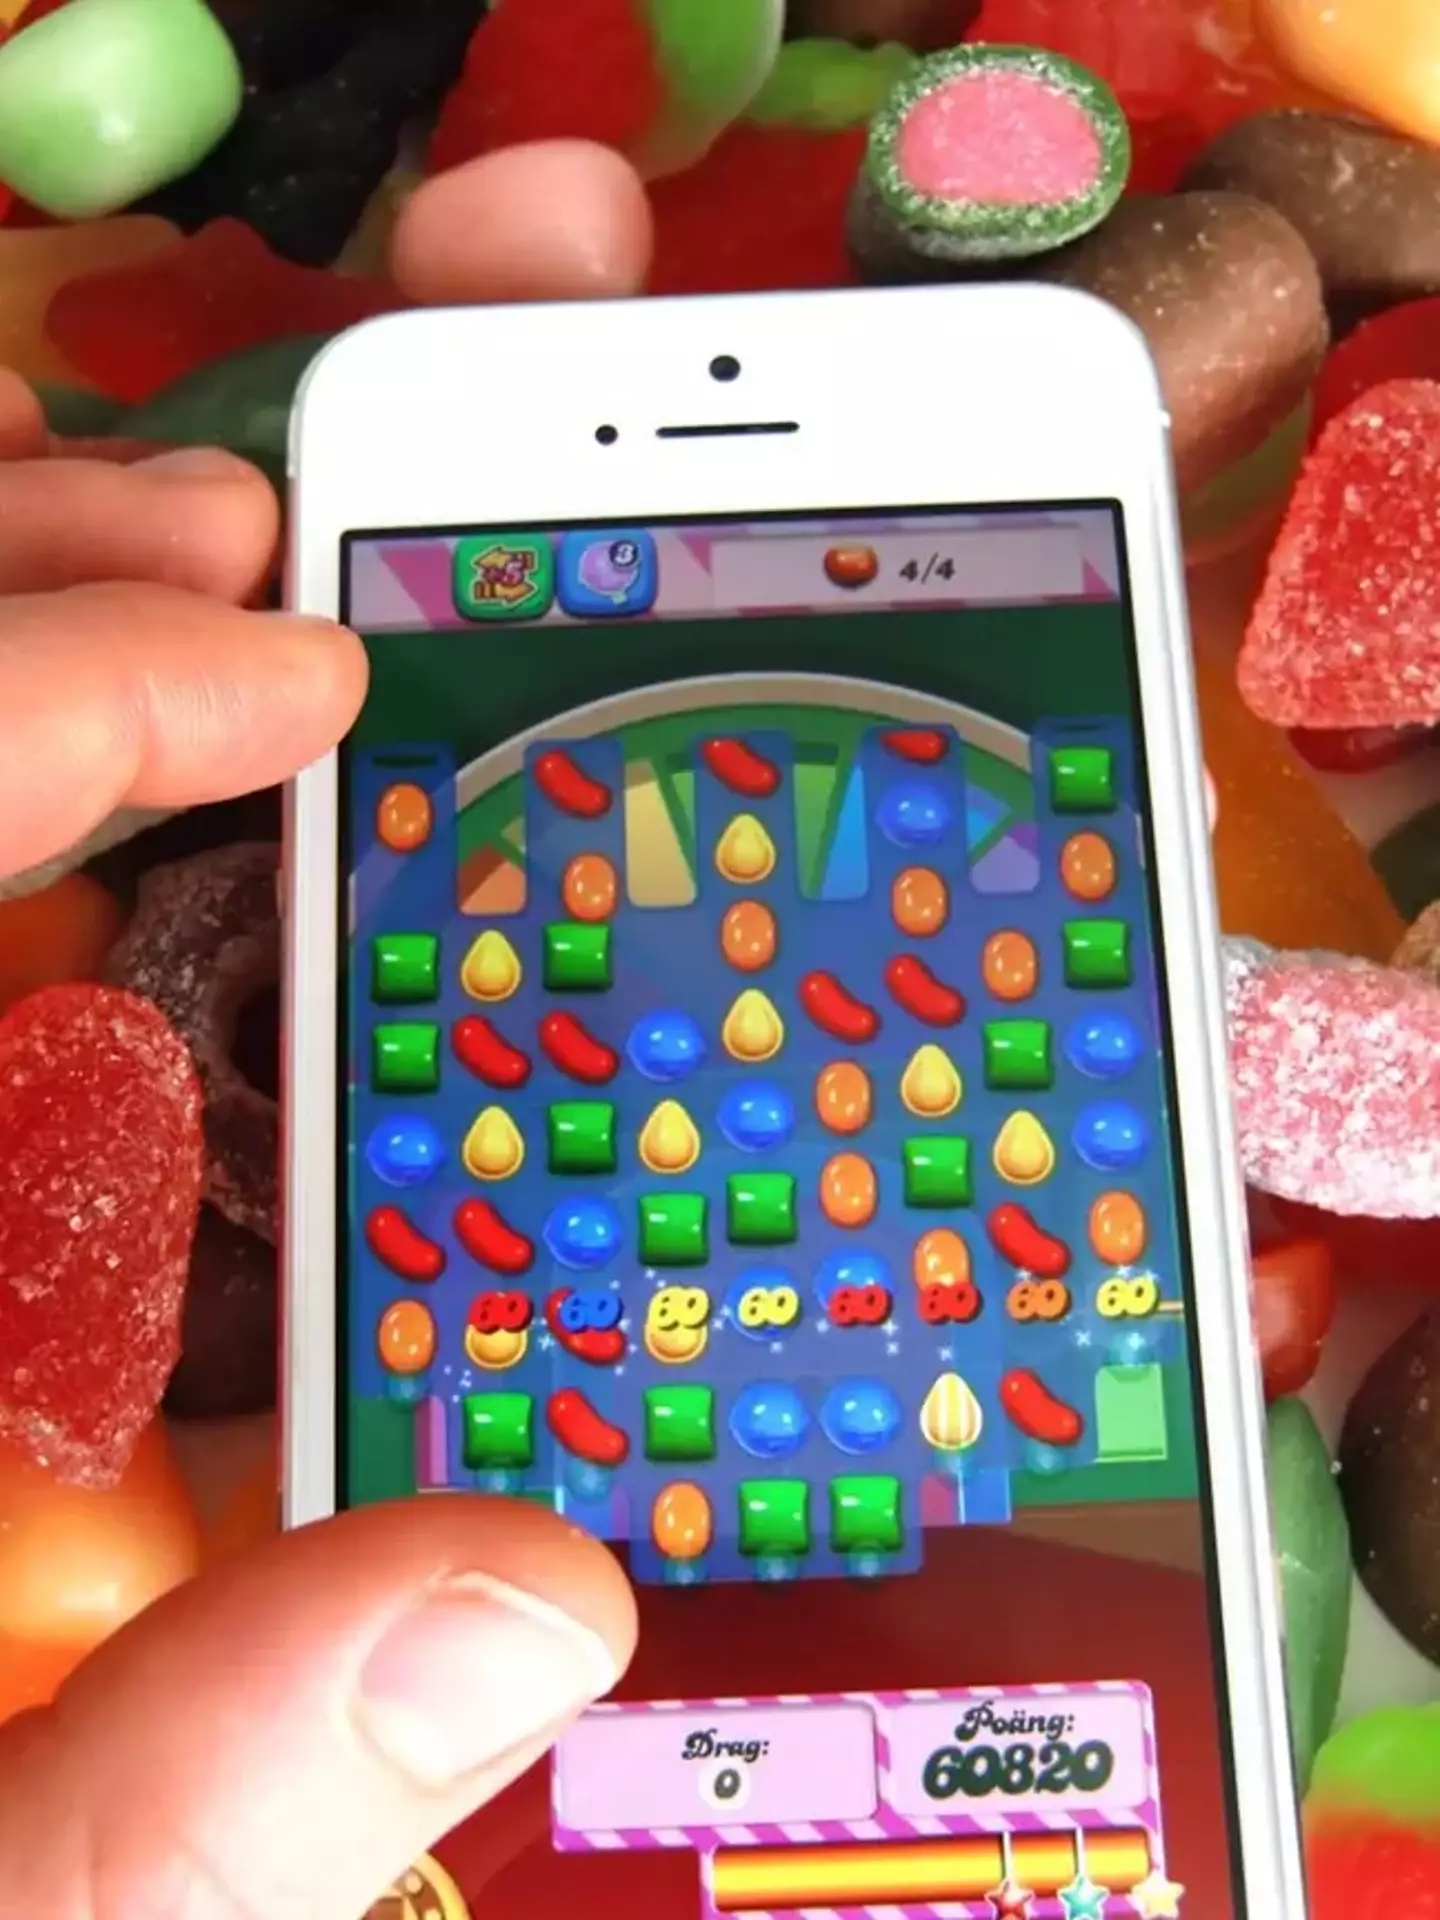 Messing with Call of Duty is one thing but if you go near Candy Crush there'd be hell to pay.